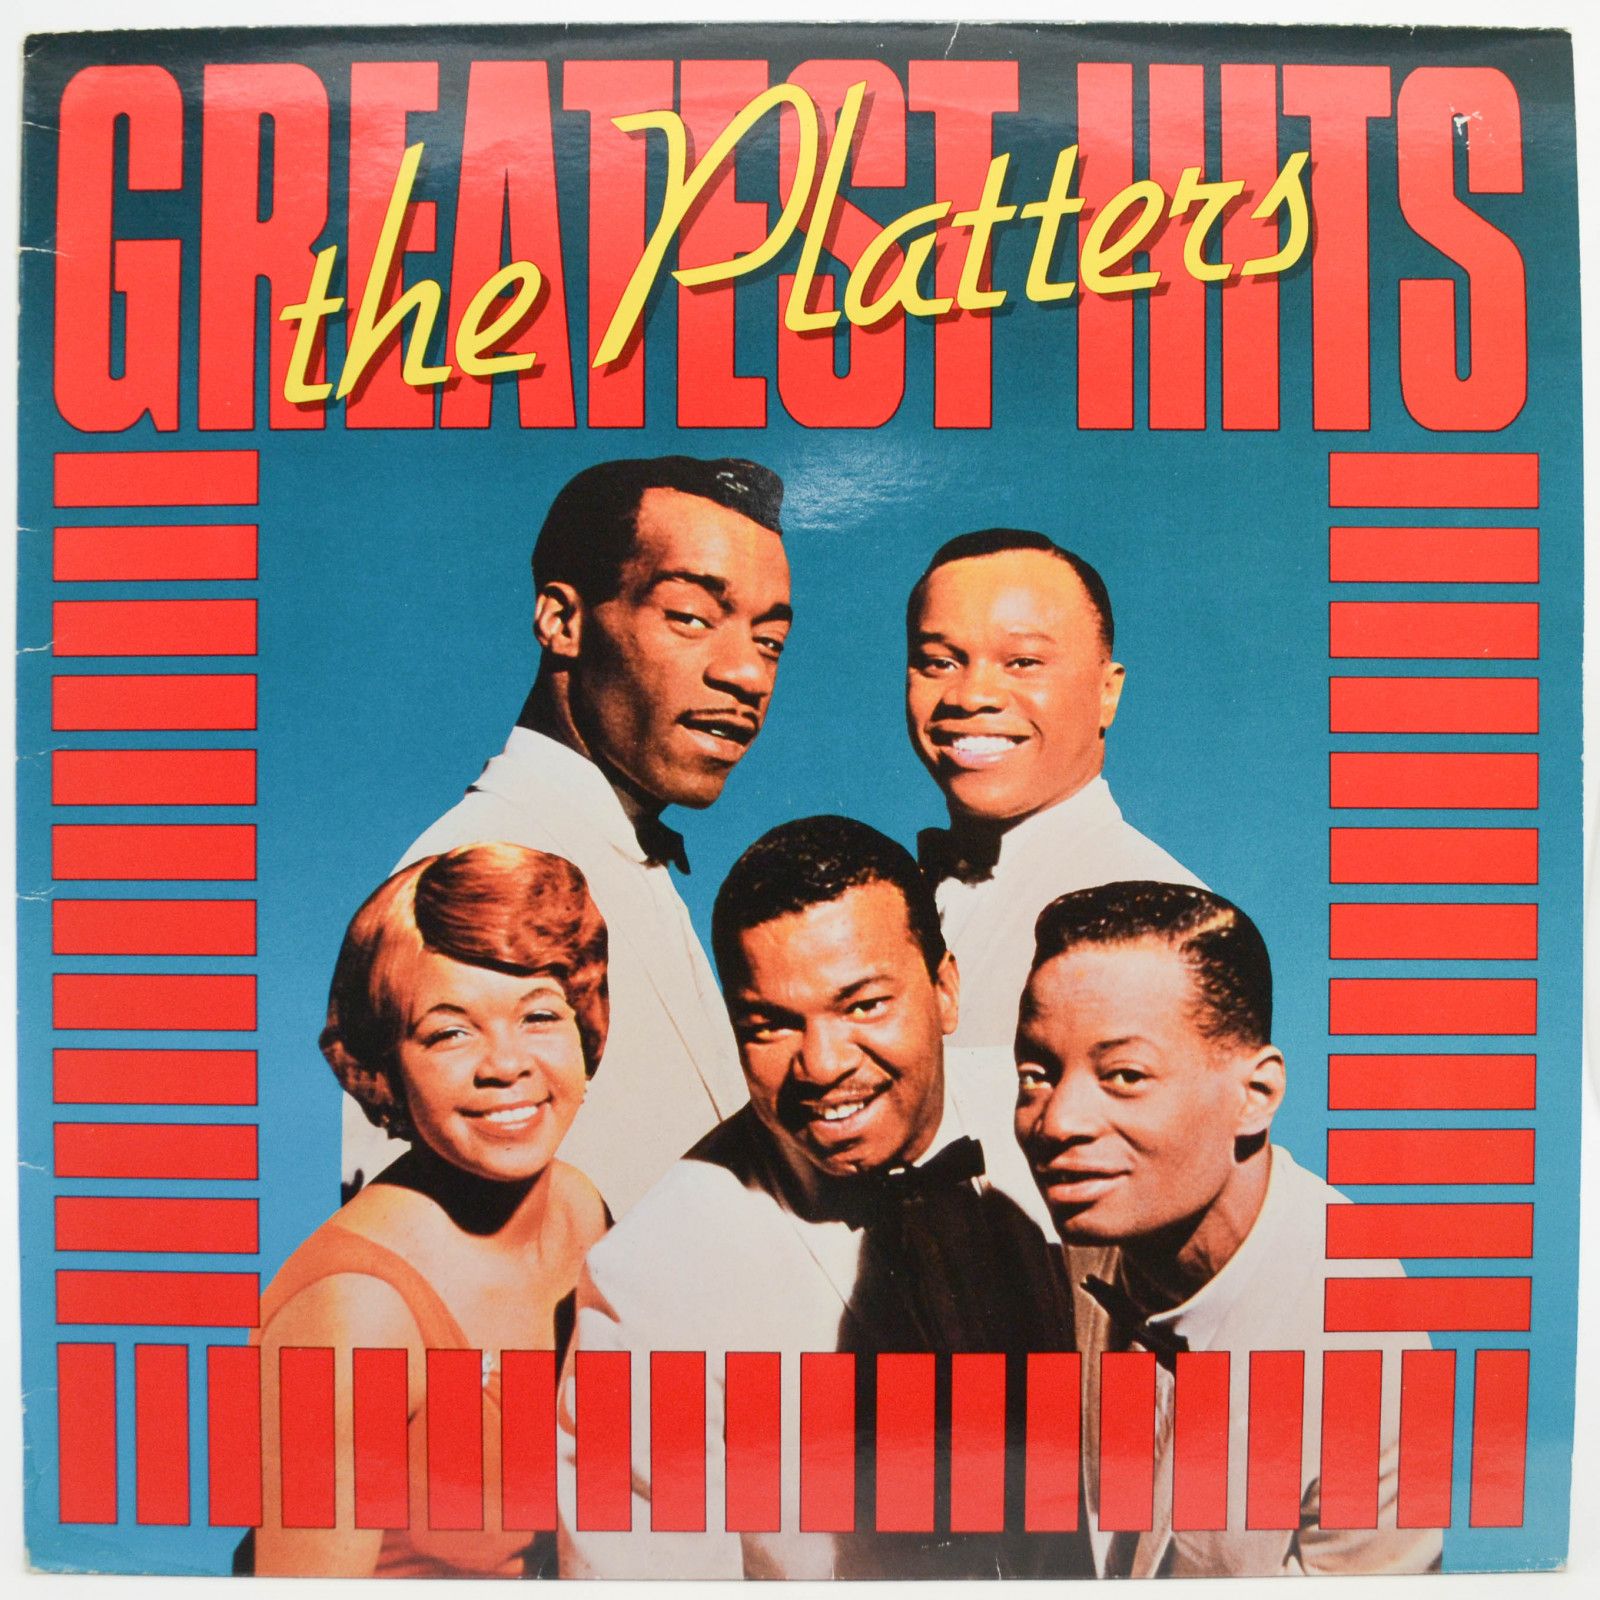 Platters — Greatest Hits, 1983